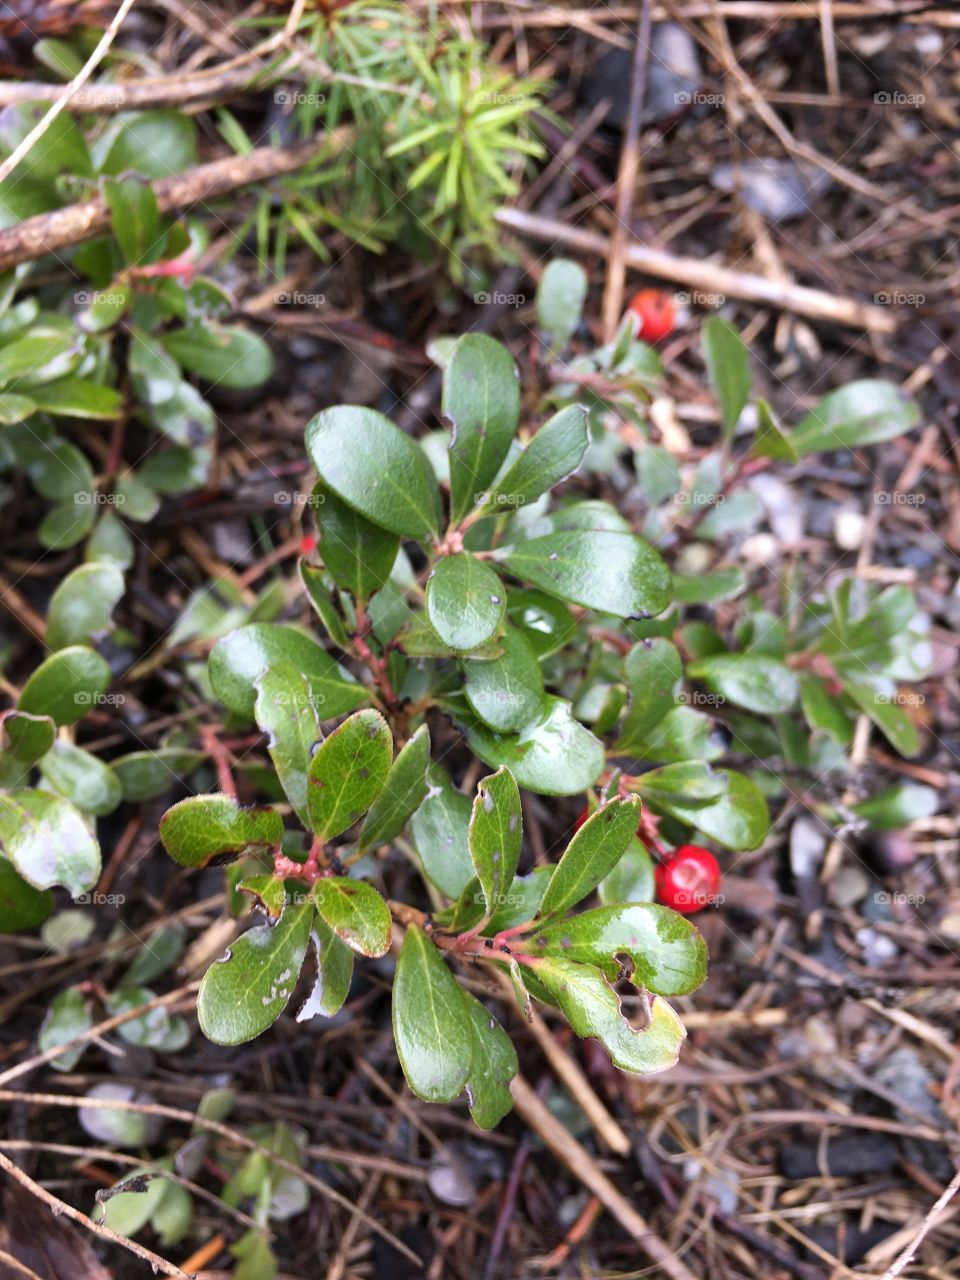 A small ground plant with red berries